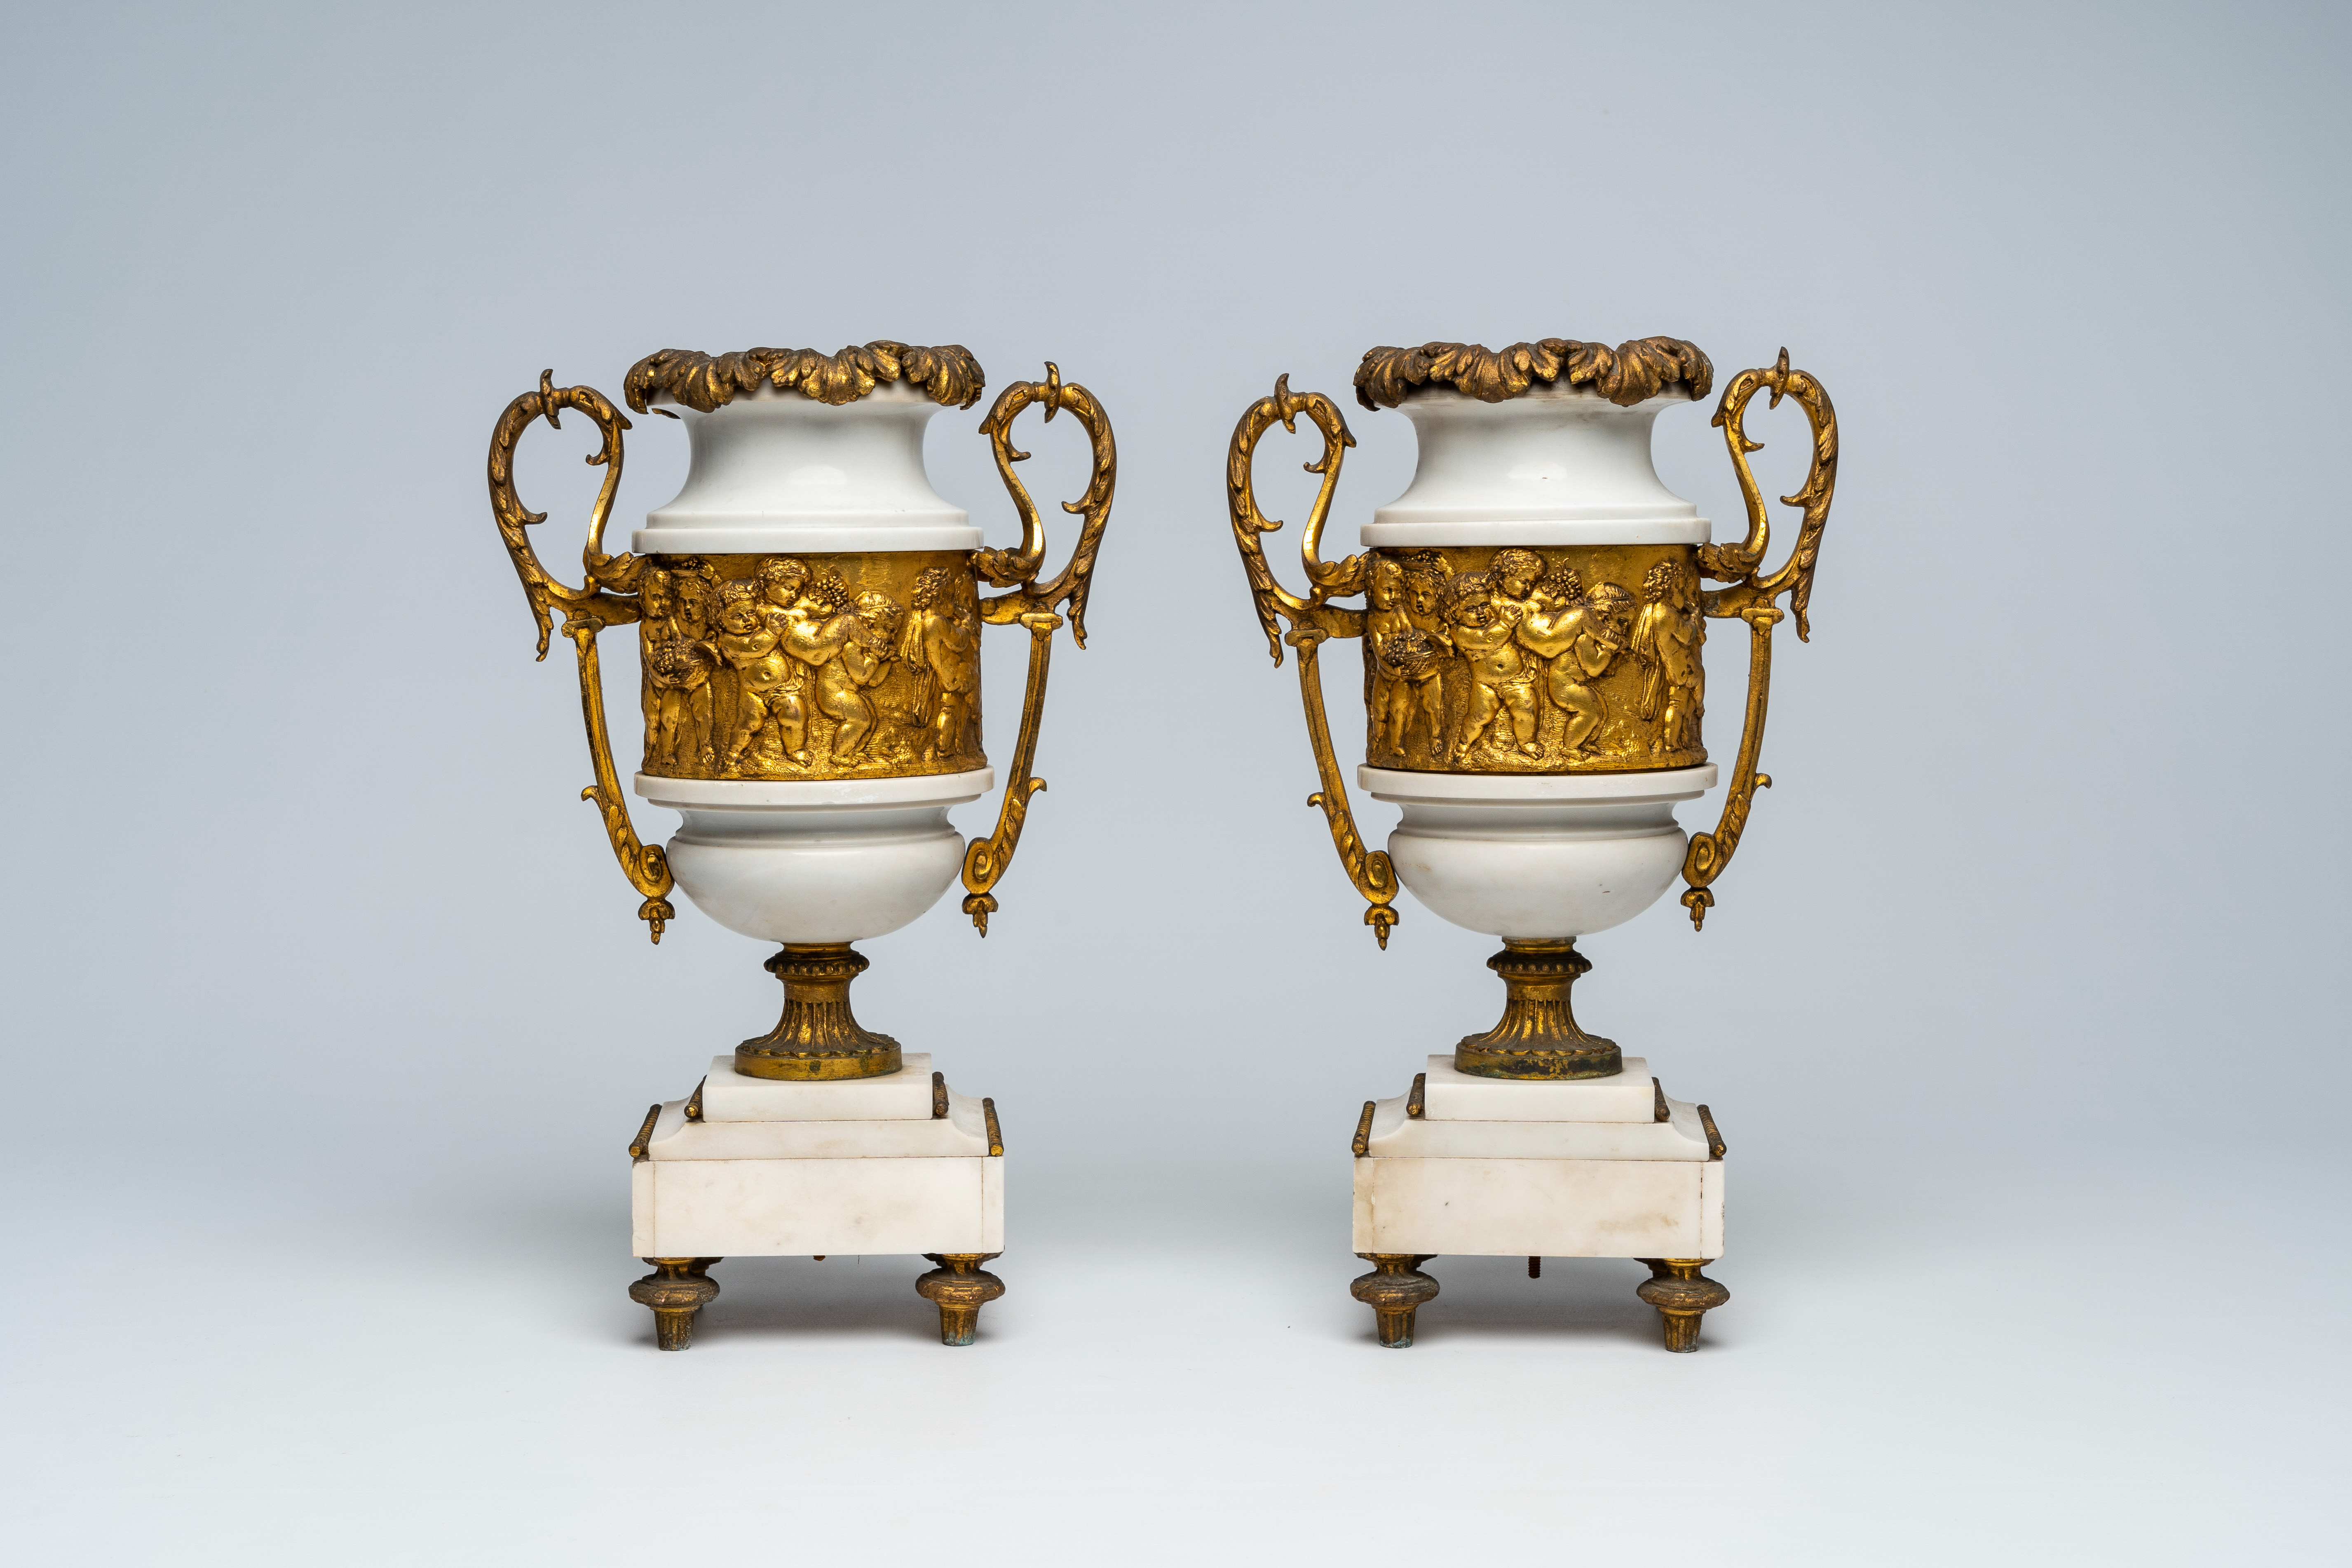 A pair of French gilt mounted white marble vases with relief design of putti, goats and Bacchus them - Image 3 of 7